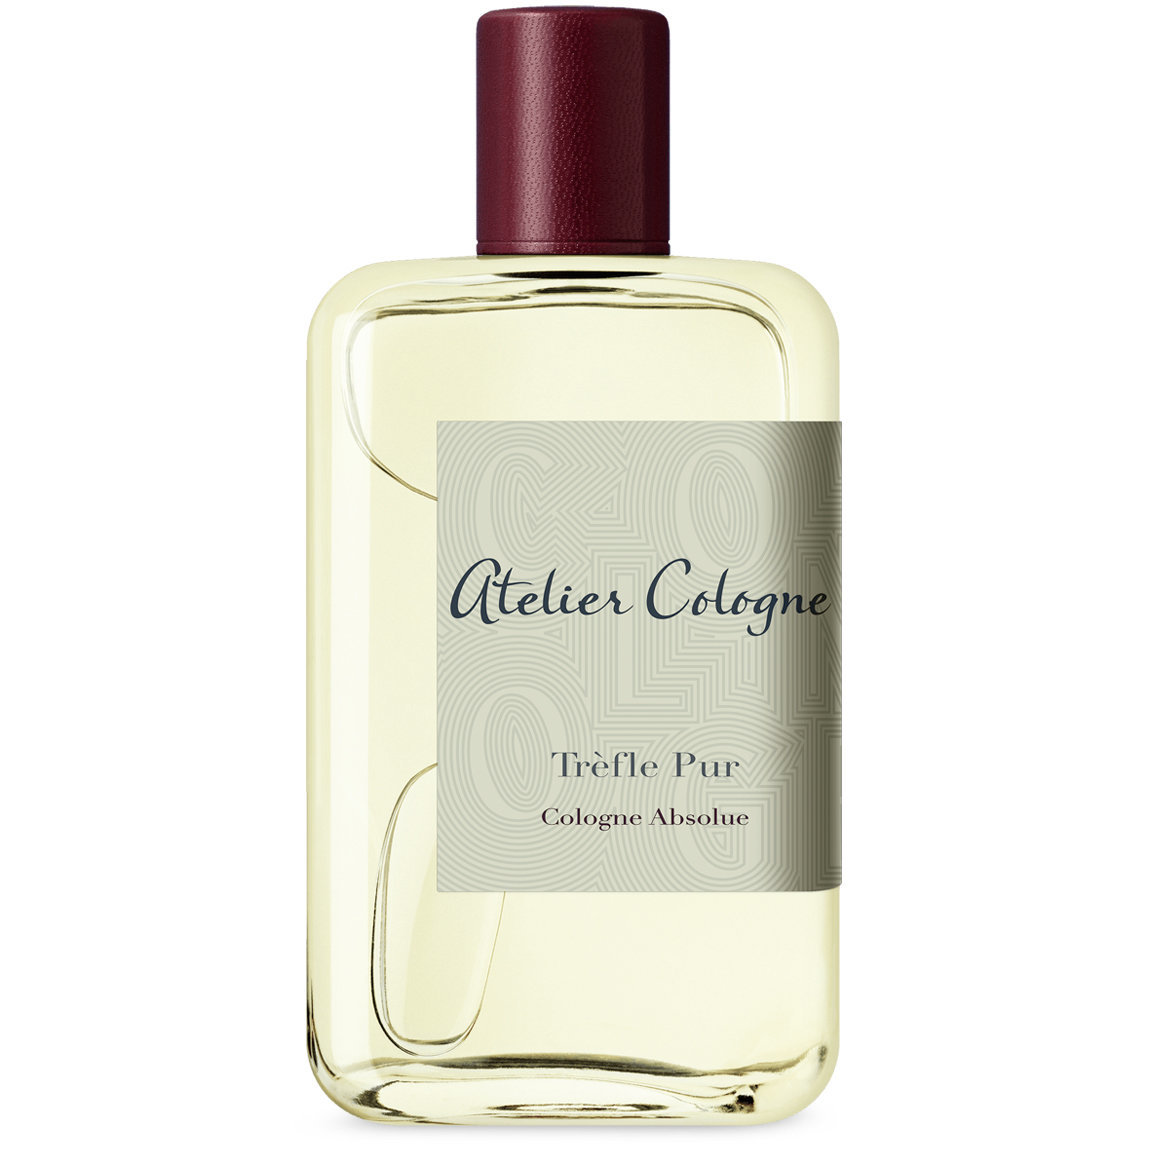 Atelier Cologne Trèfle Pur 200 ml alternative view 1 - product swatch.